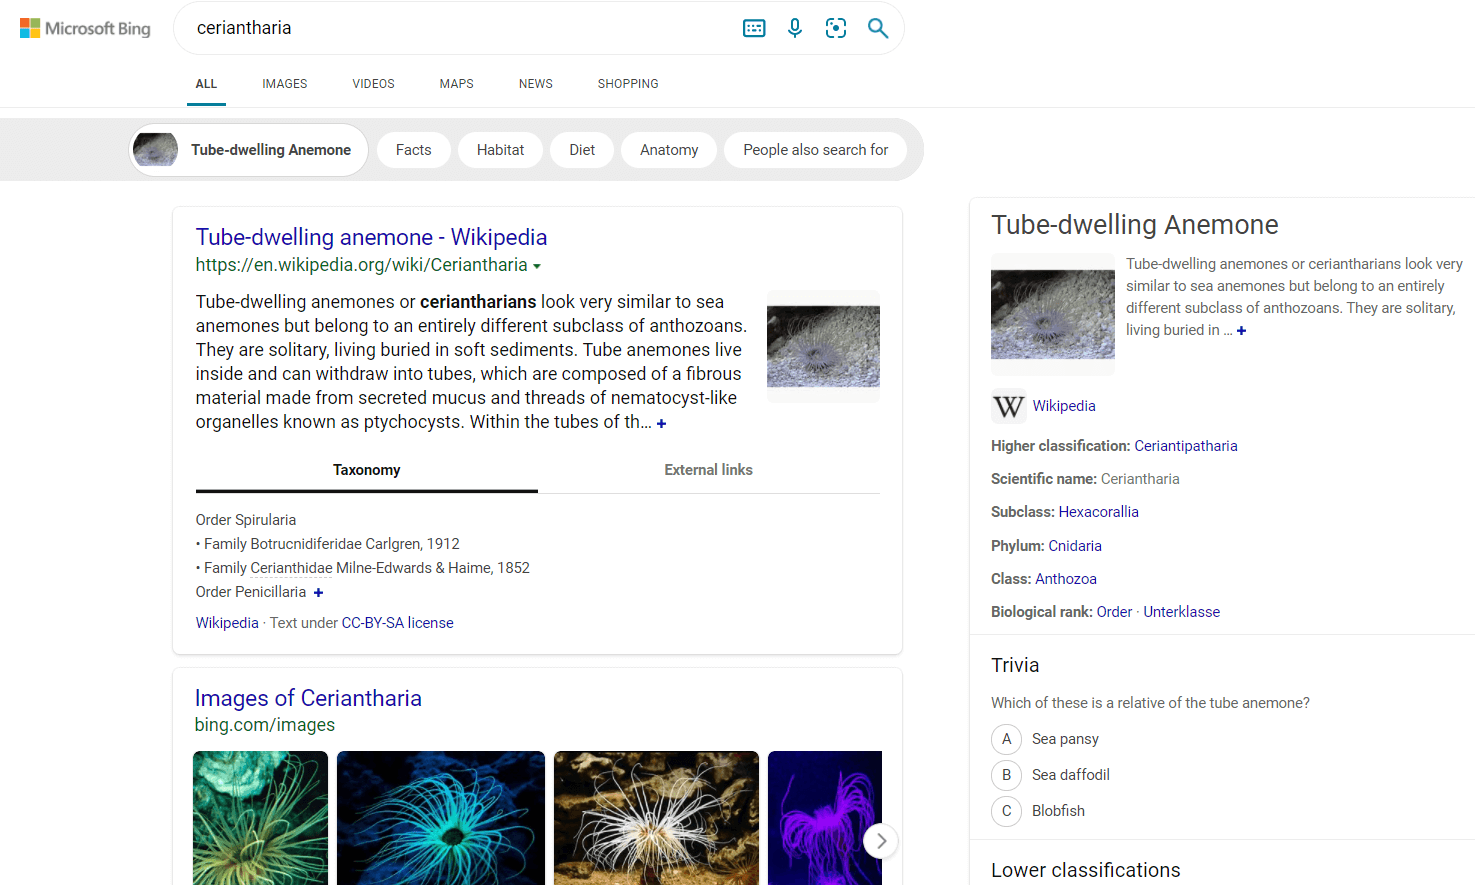 Example of search results on Bing